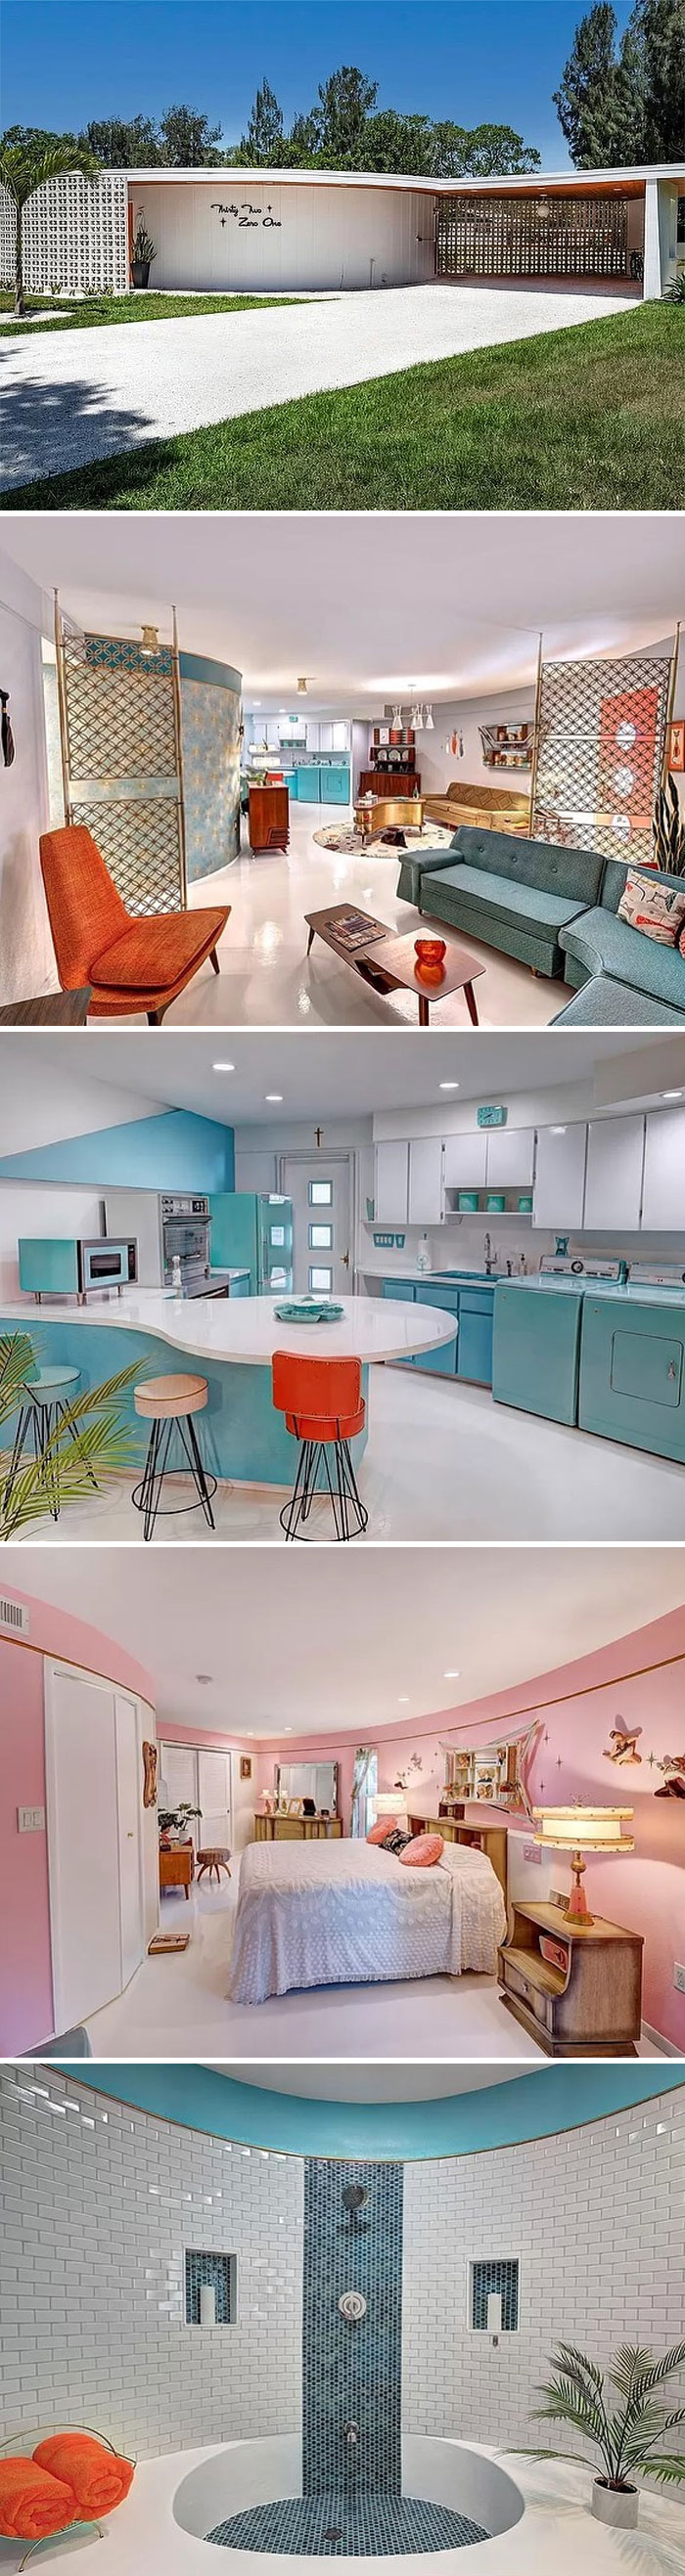 At 3201 Peach Tree At In Sarasota You Can Live Like The Jetsons! Check Out This Vintage Gem!